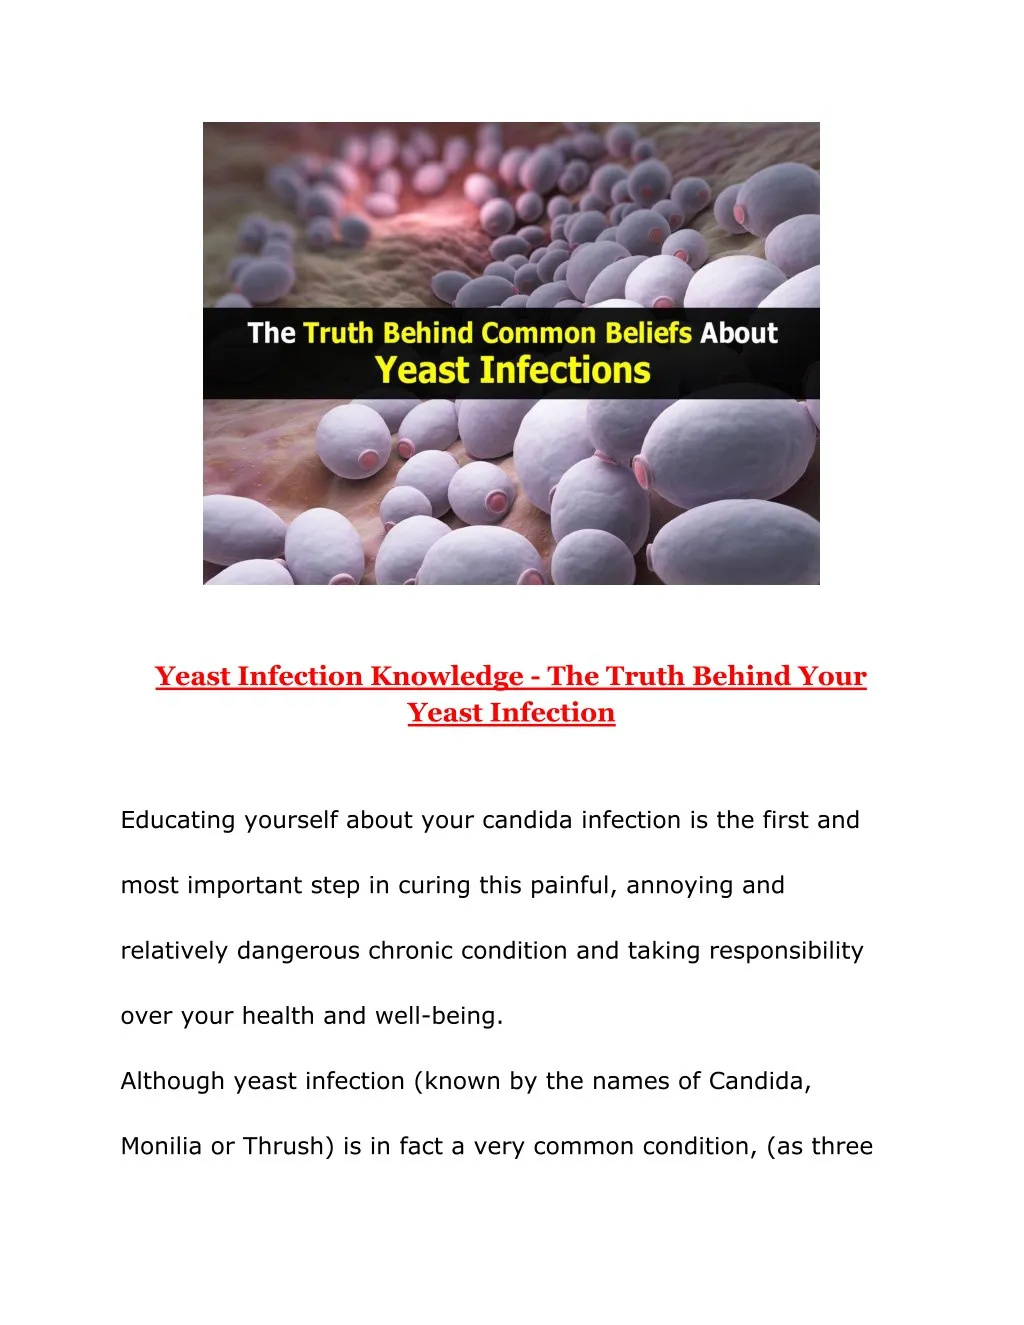 yeast infection knowledge the truth behind your